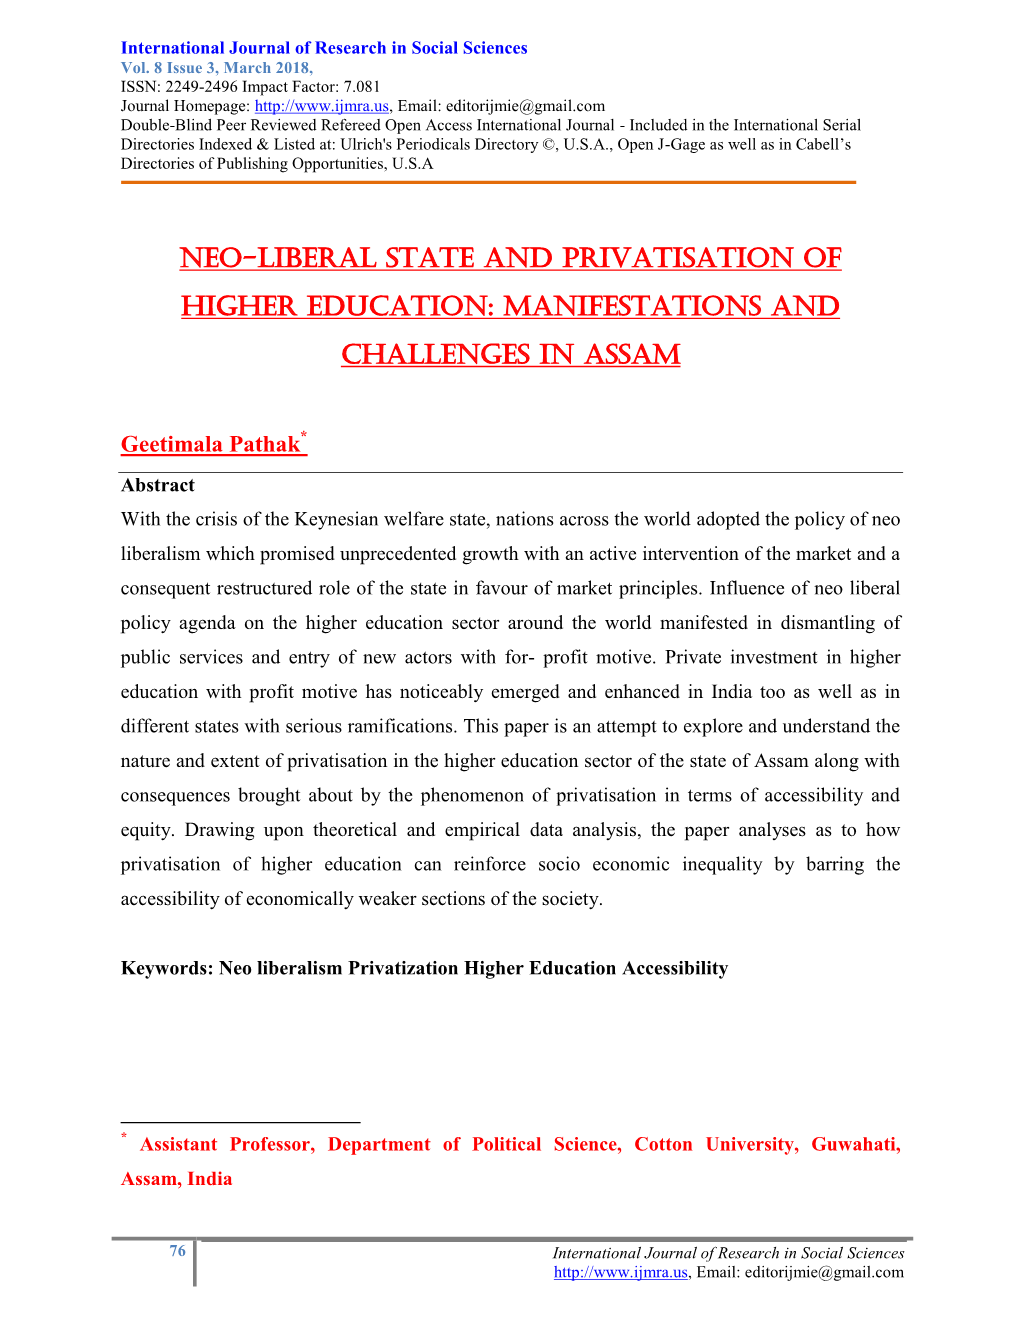 Neo-Liberal State and Privatisation of Higher Education: Manifestations and Challenges in Assam